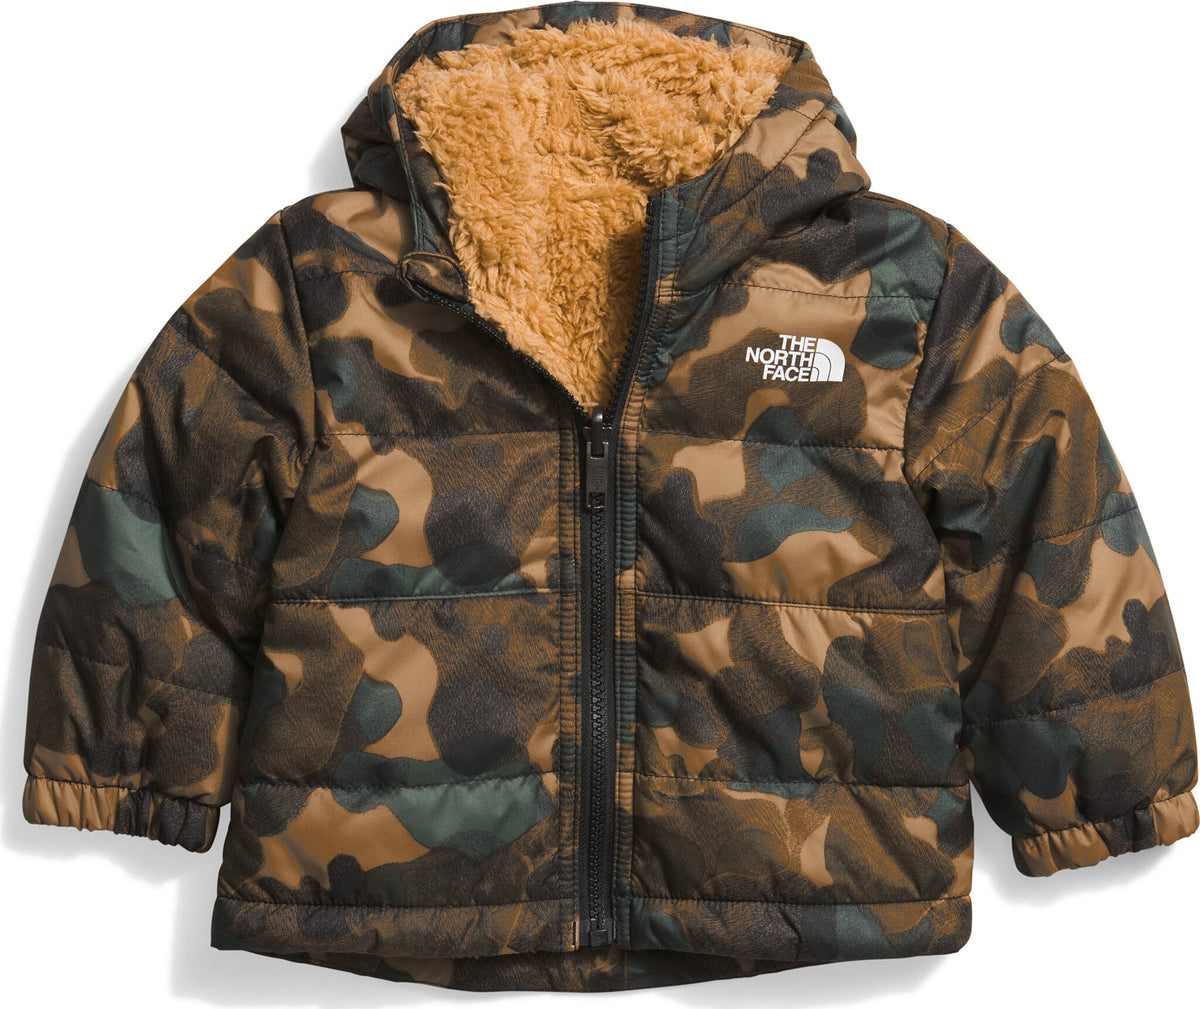 The North Face Mount Chimbo Reversible Full Zip Hooded Jacket - Baby